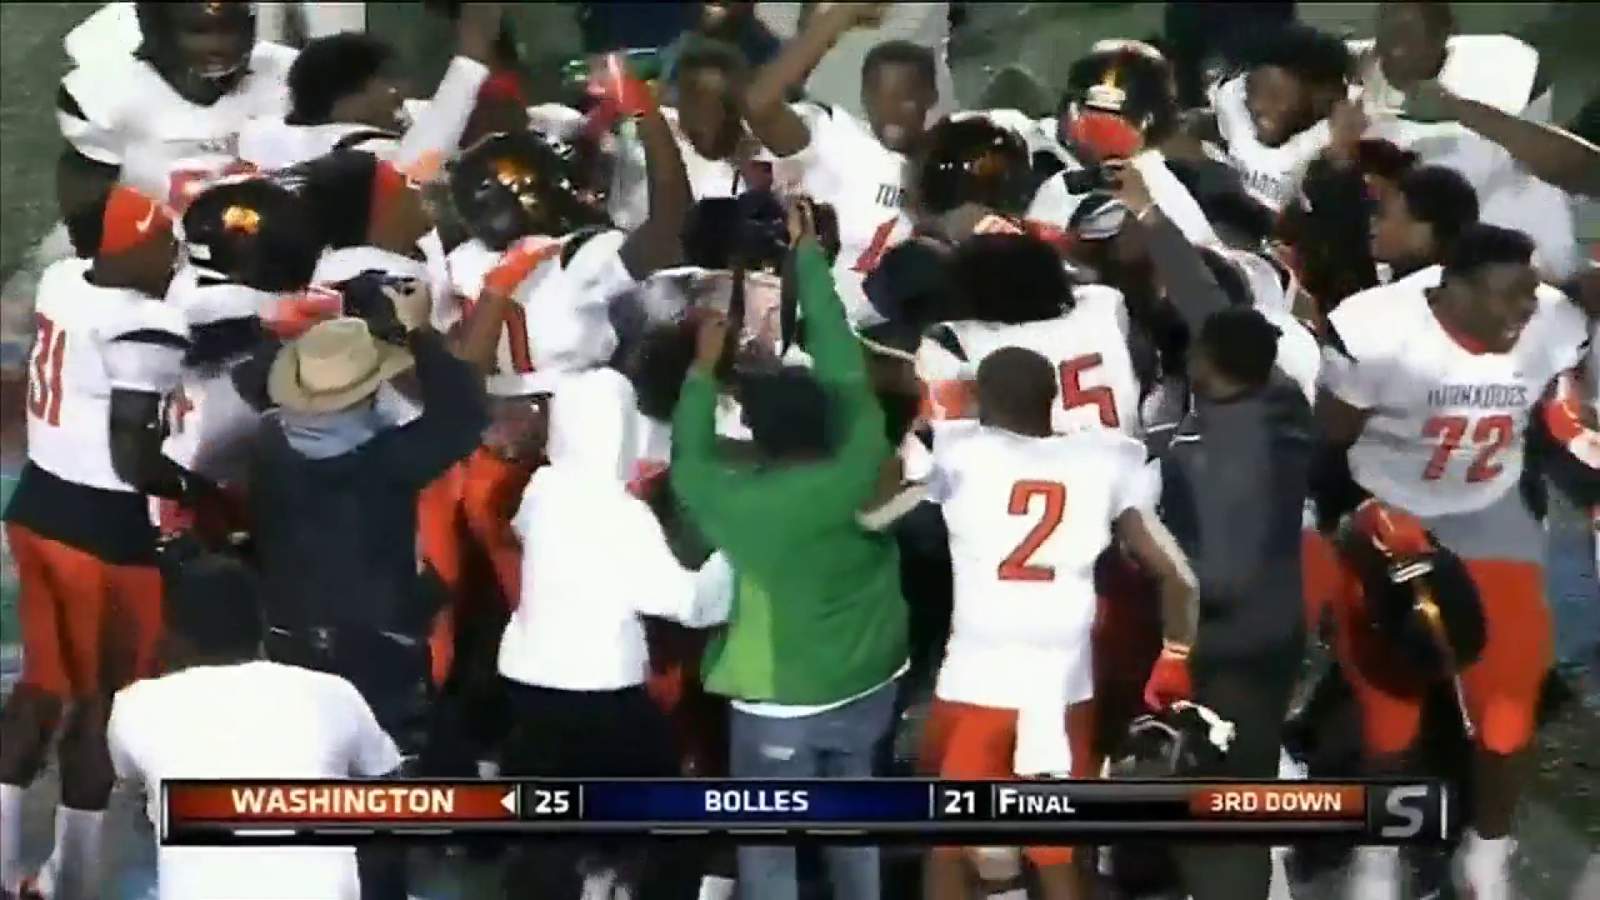 2 touchdowns, forced fumble in final 5:25 gives Booker T. Washington state championship